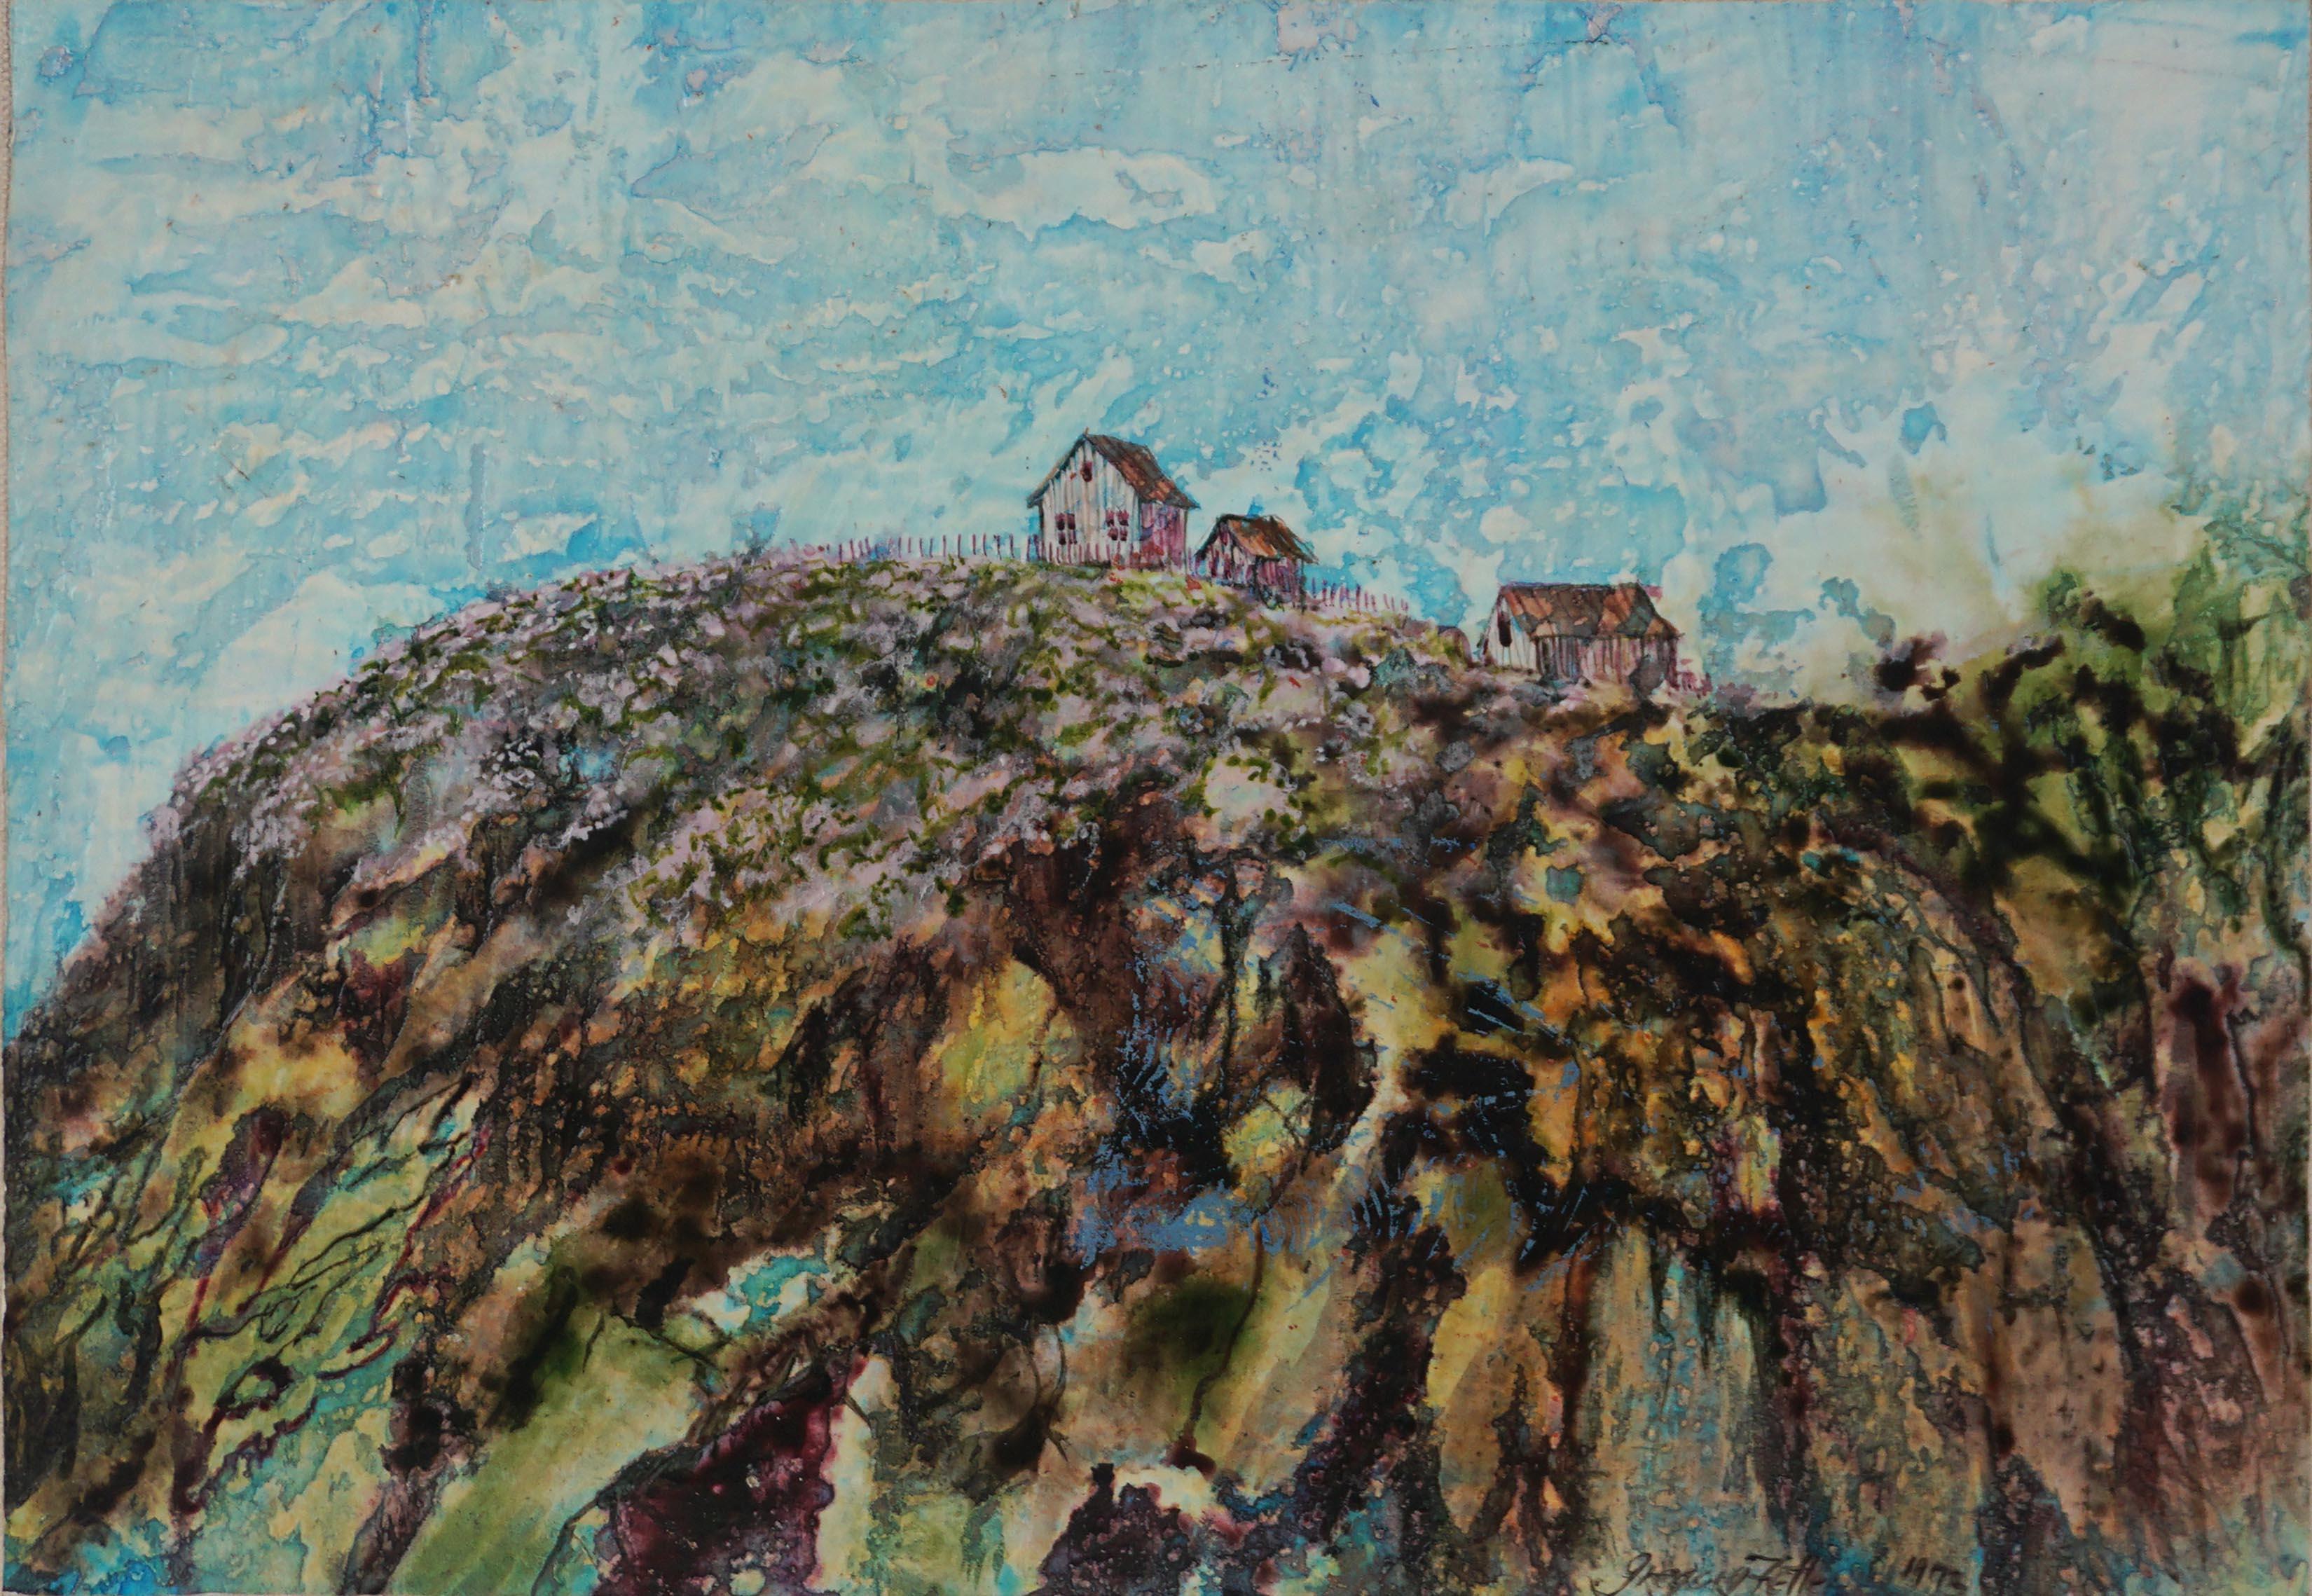 Wonderful encaustic landscape of Coastal Farm by Northern California artist Gregory Fetler (American, b. 1946), 1973. Signed and dated lower right hand corner and on verso. Attached to painted canvas which offers stability and protection for